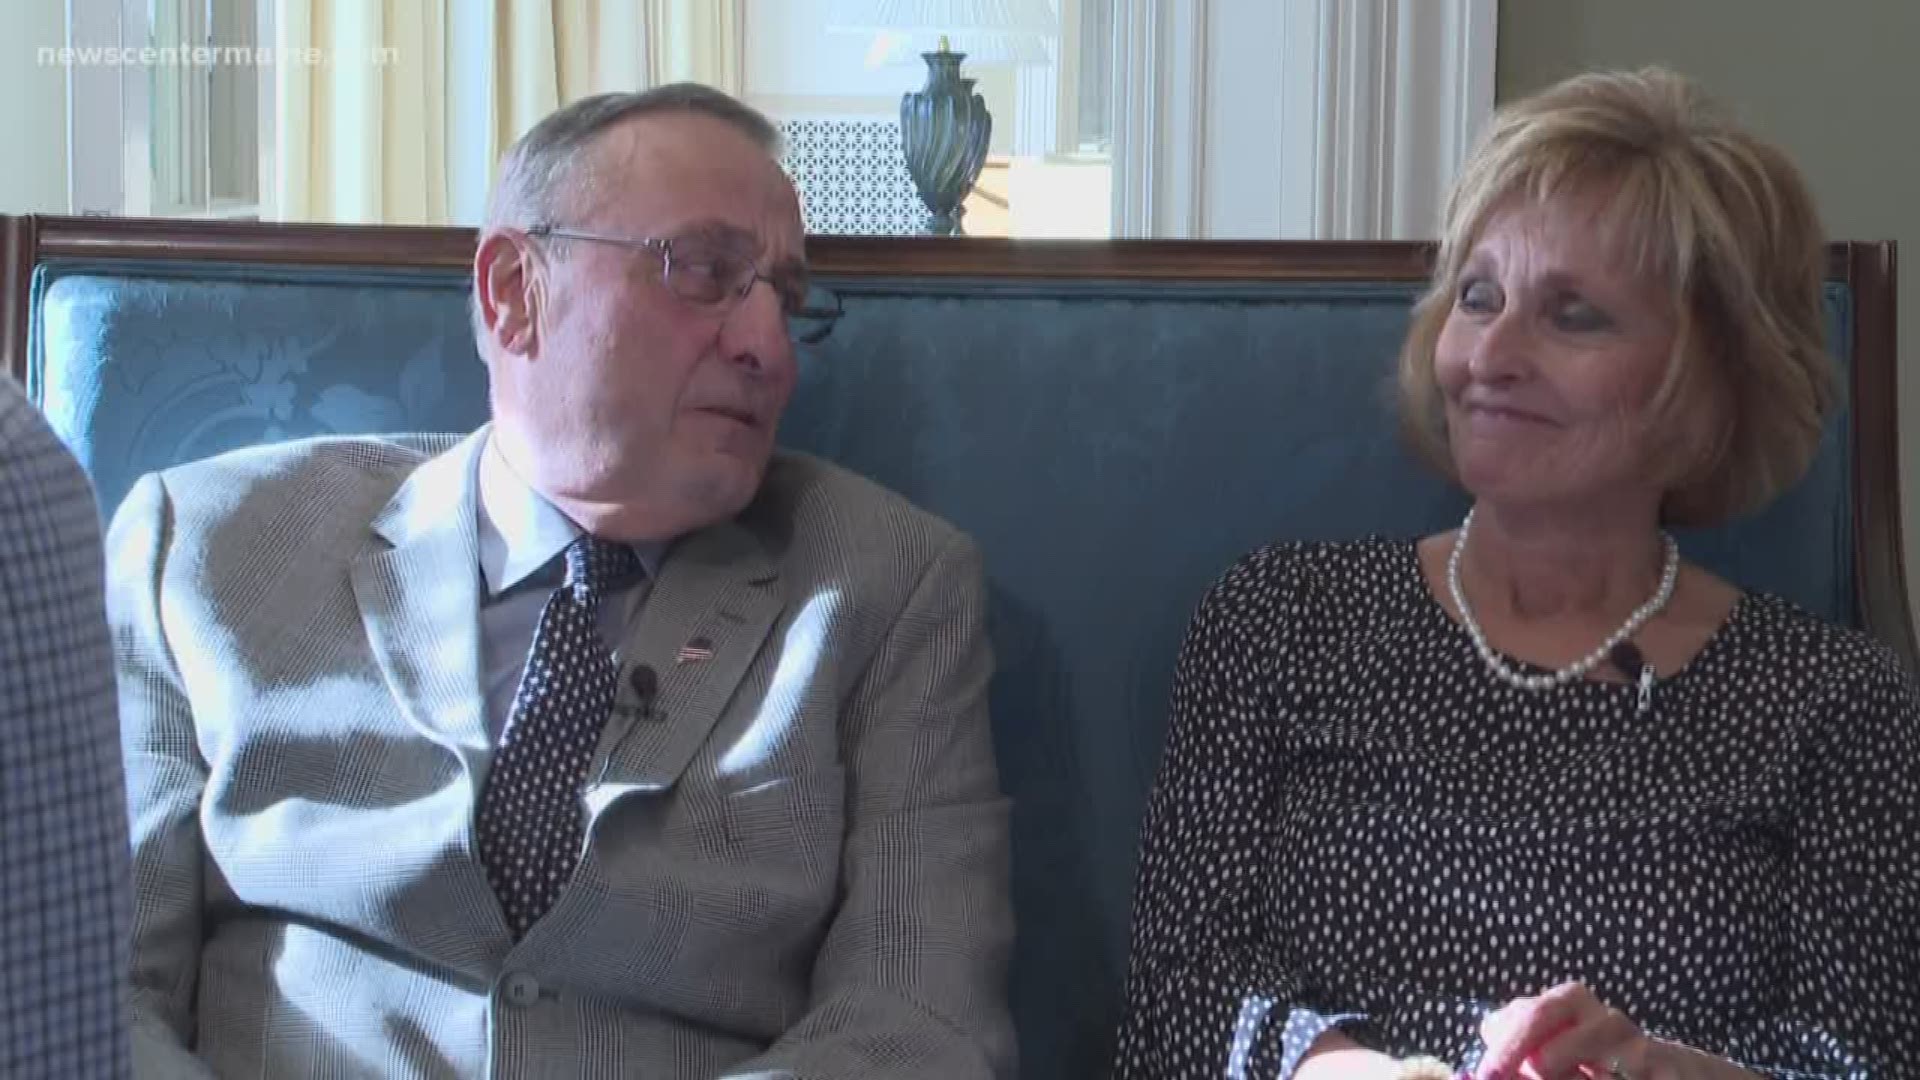 The public knows them as Governor Paul LePage and First Lady Ann LePage... Friends and family know them as husband and wife, mother and father.